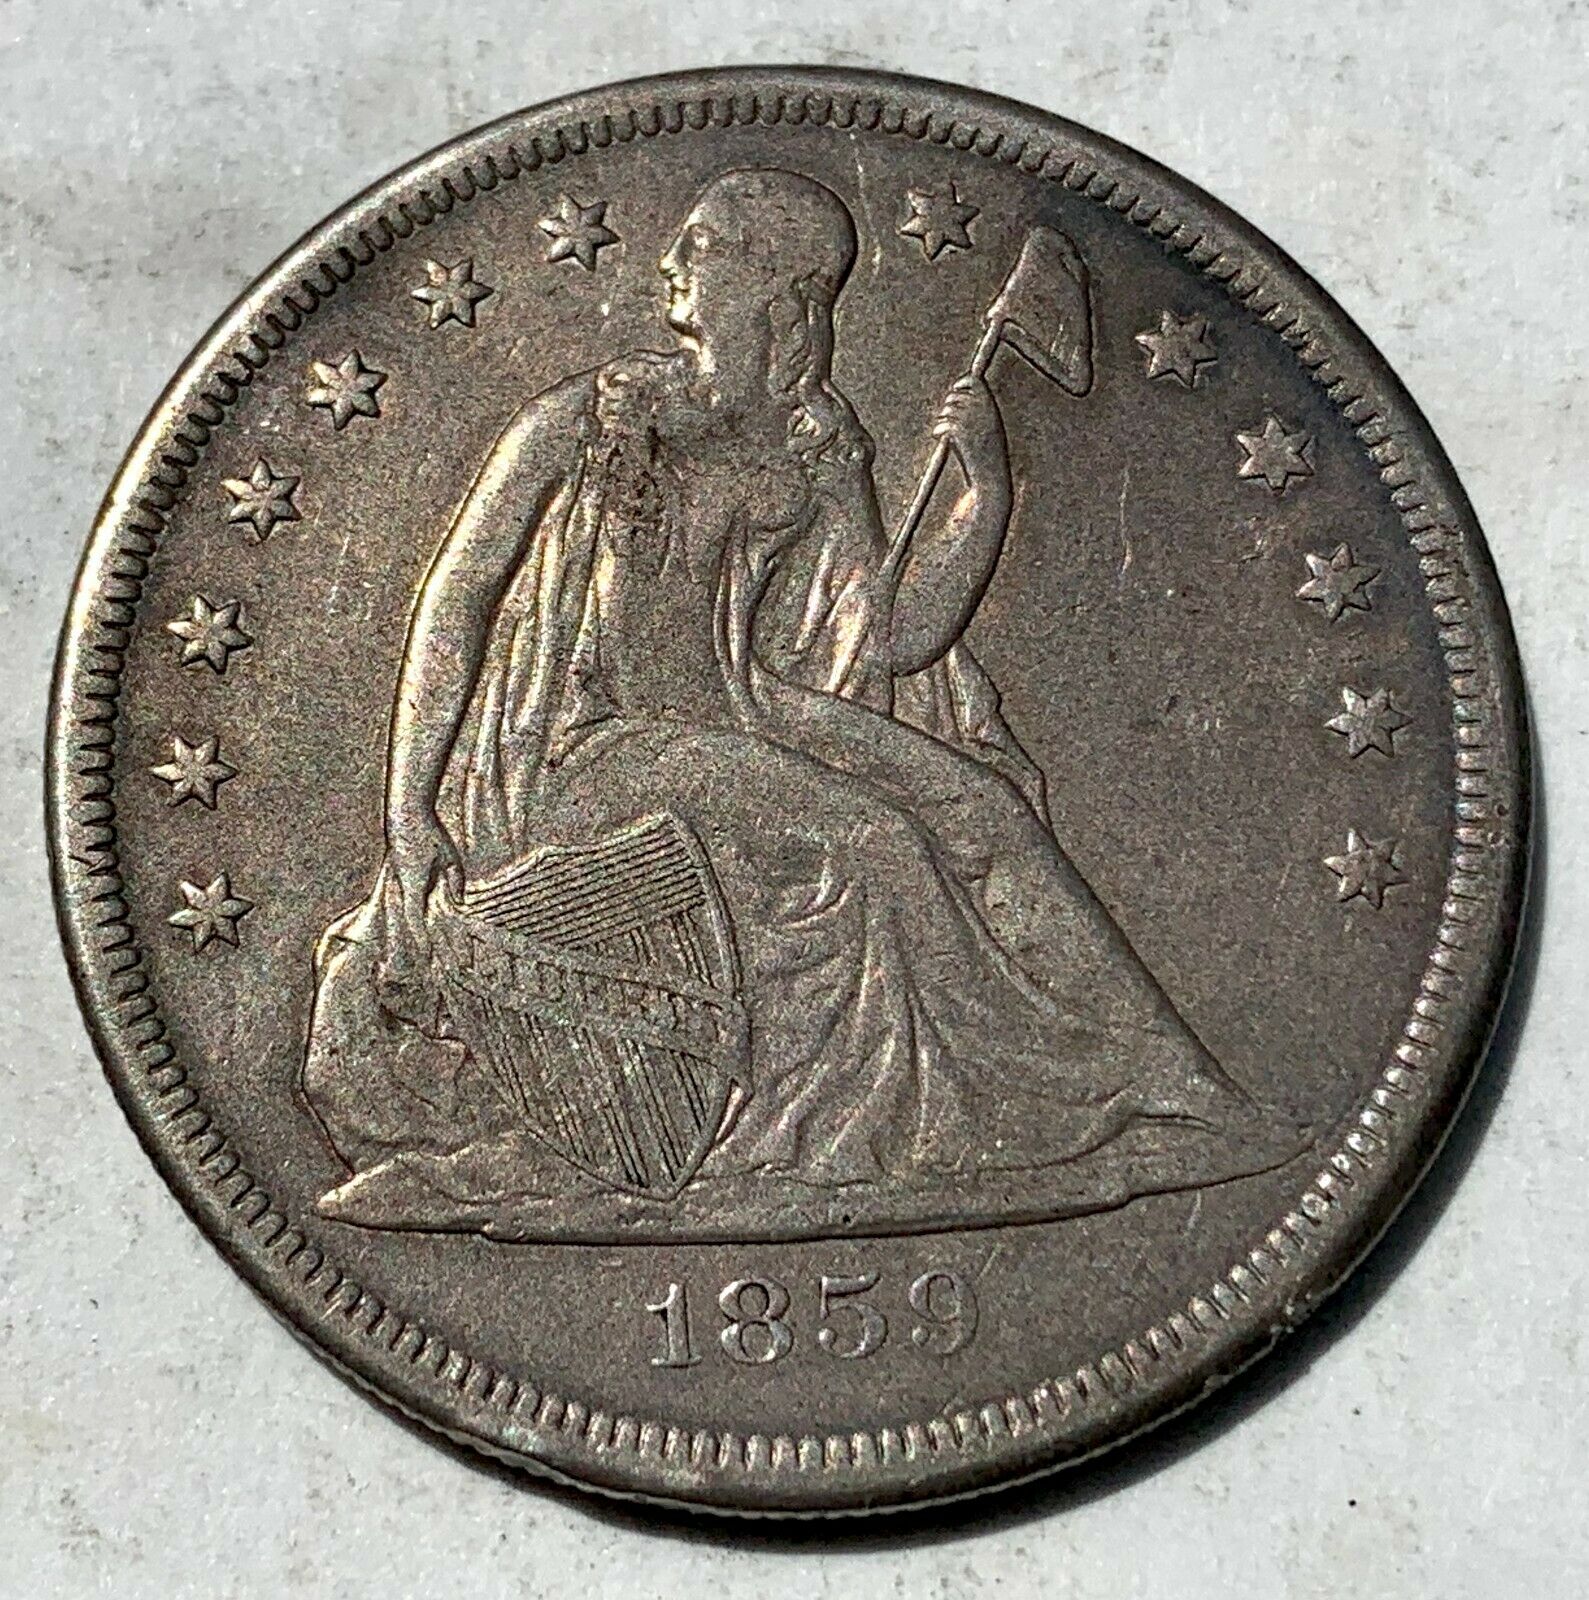 Usa Seated Liberty Dollar 1859 O - Mintage Only 360,000